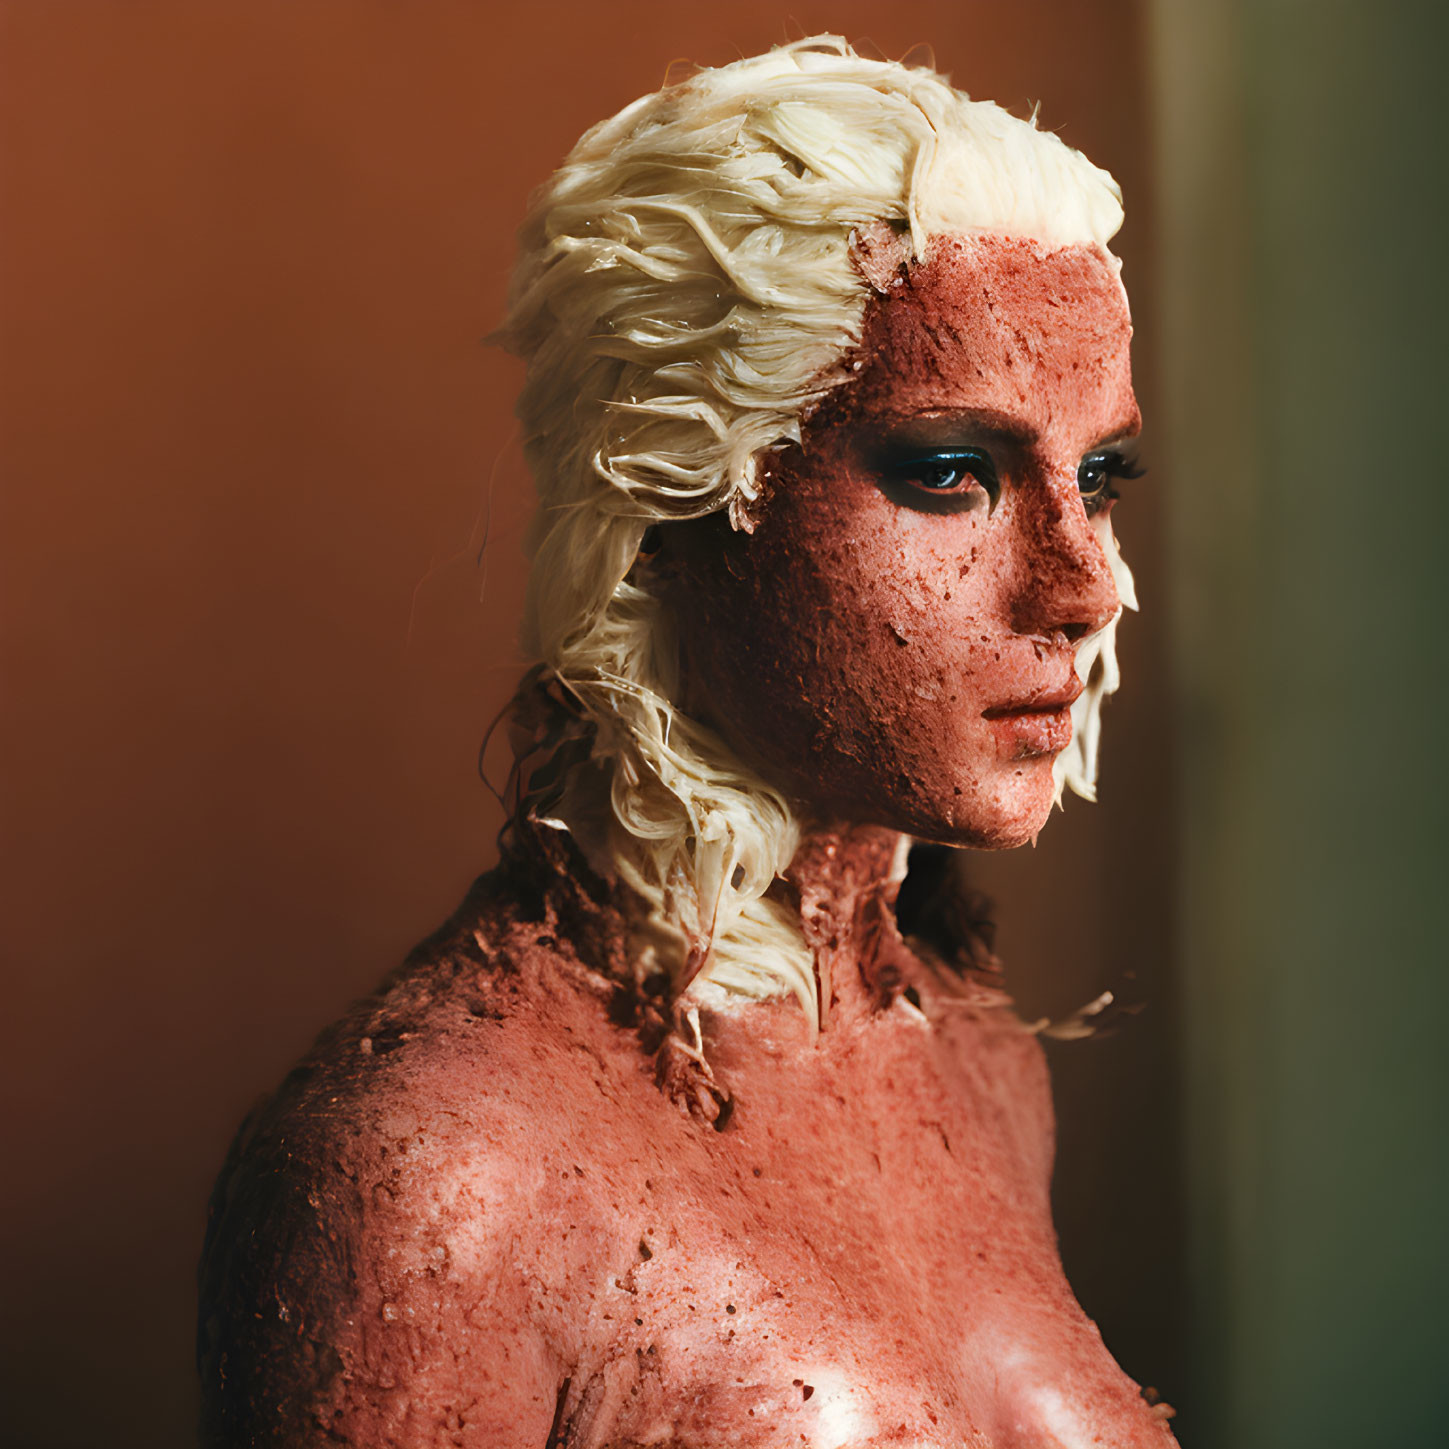 Striking Blonde Hair and Clay-Covered Skin on Warm Background